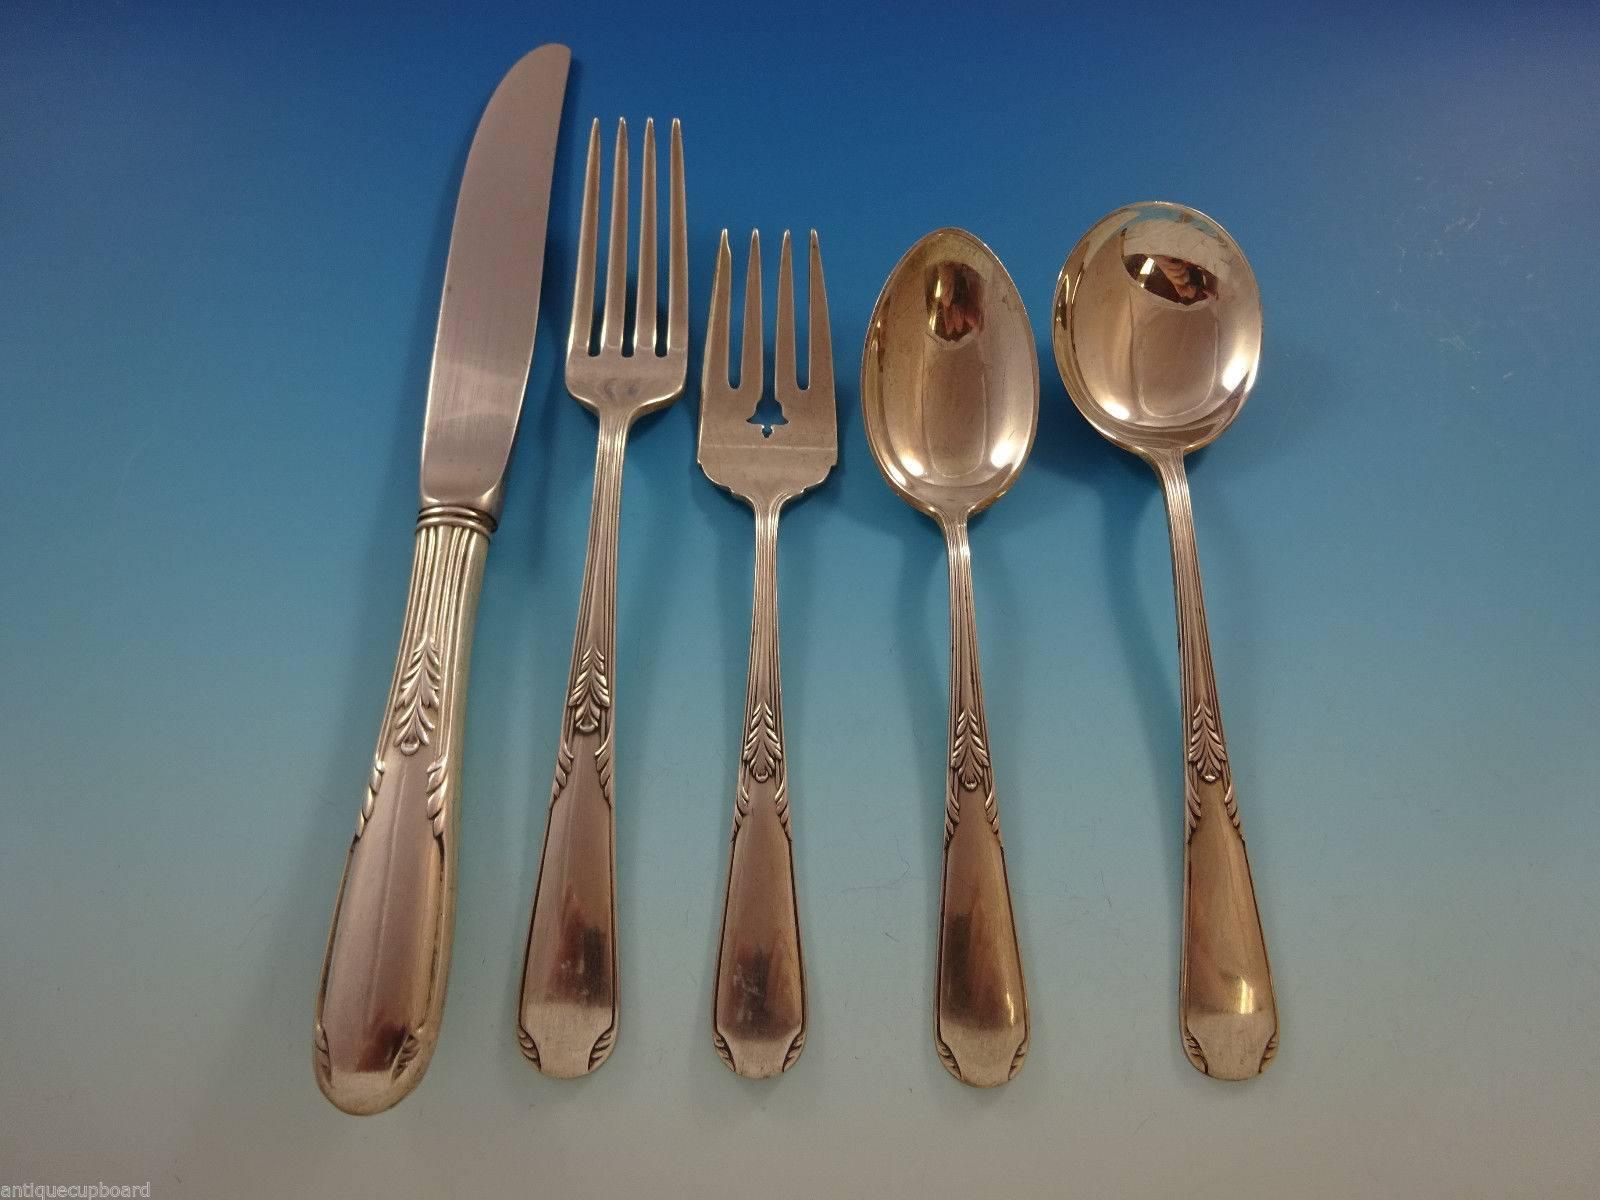 Fleetwood by Manchester sterling silver flatware set of 60 pieces. This set includes:

12 knives, 8 3/4